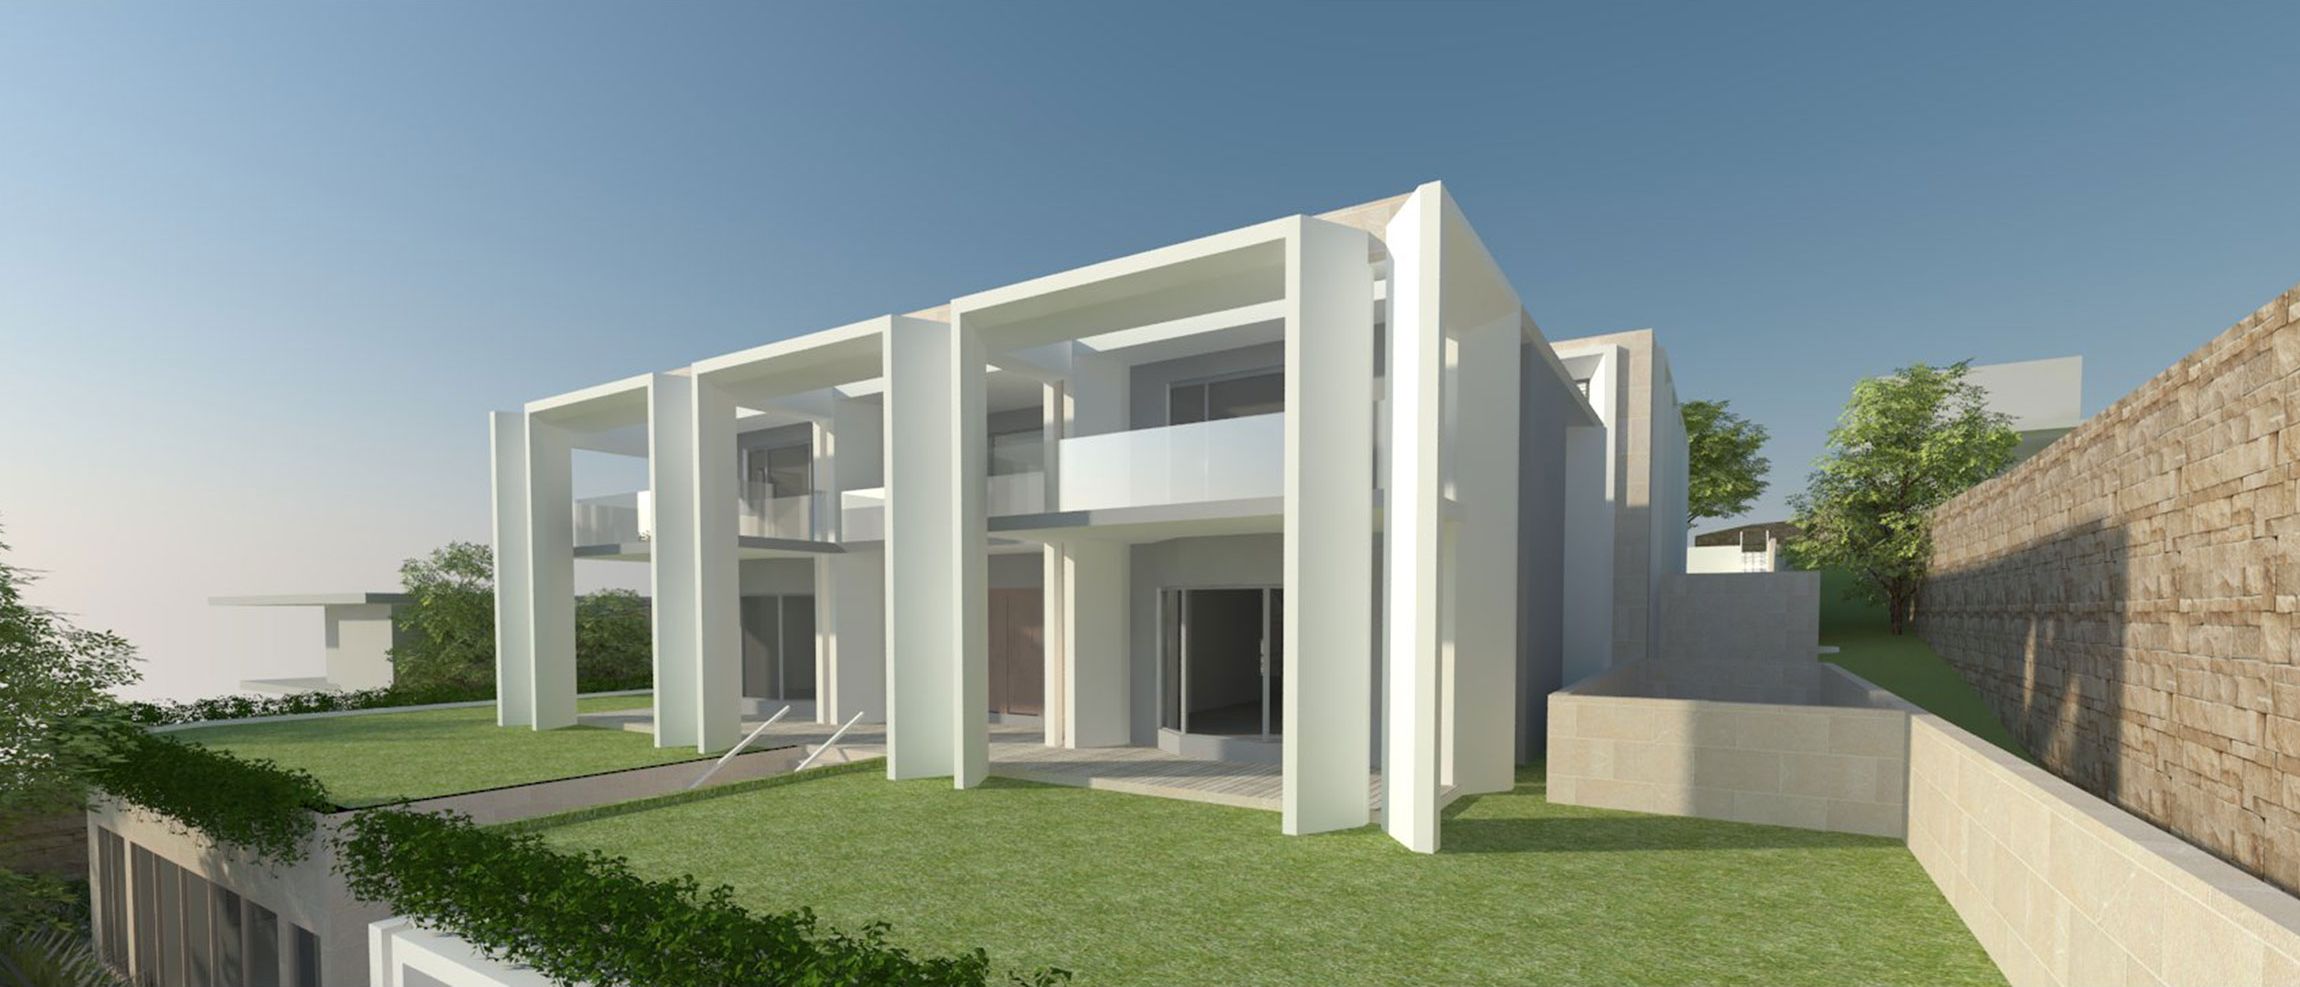 Vaucluse Residence web 1200h - 2